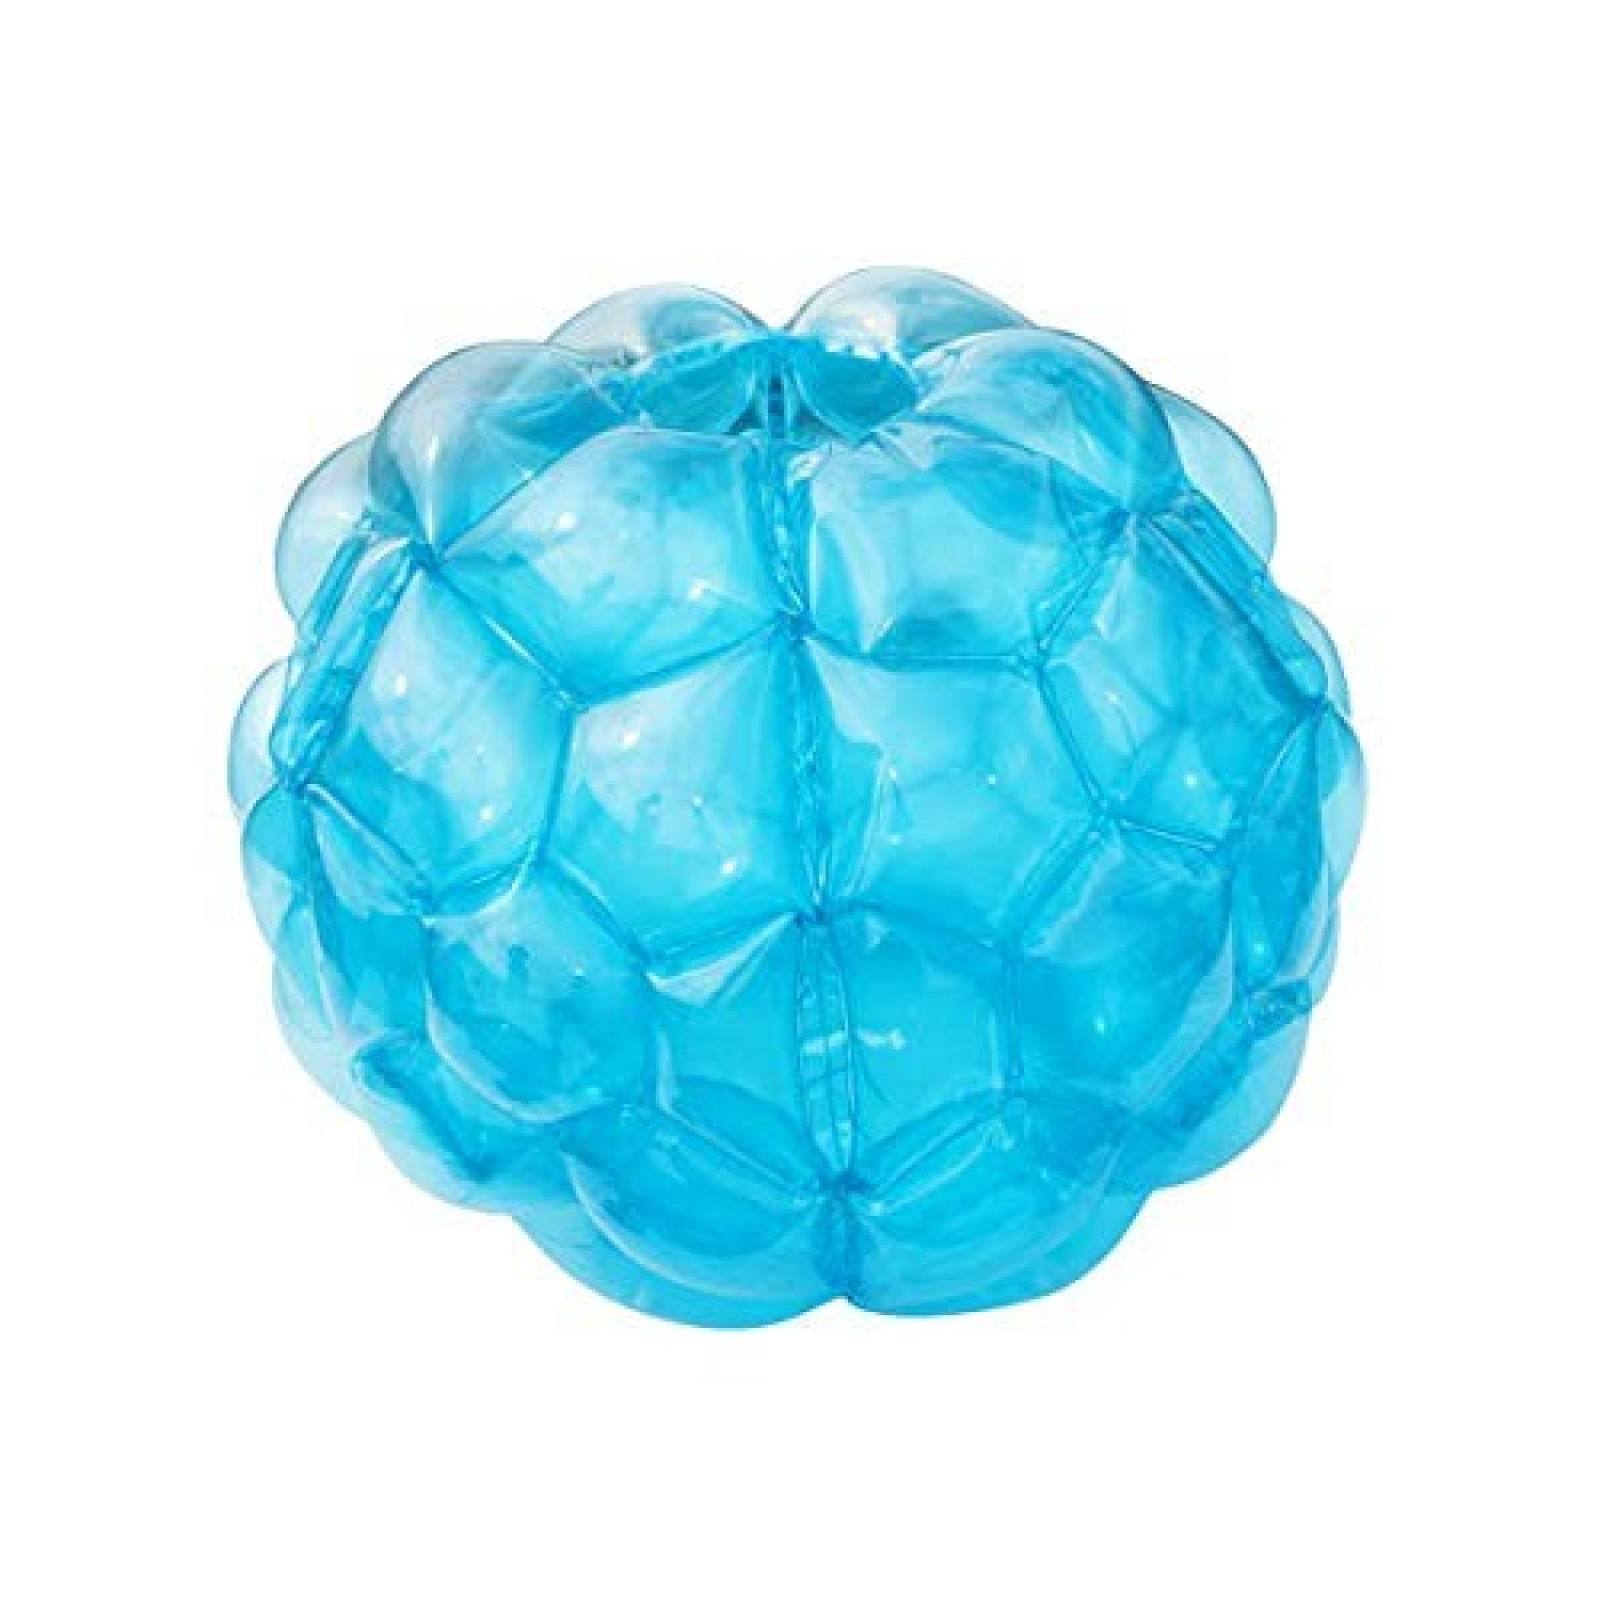 Bumper Ball SUNSHINEMALL Inflable 36 in 1 Pz -Azul